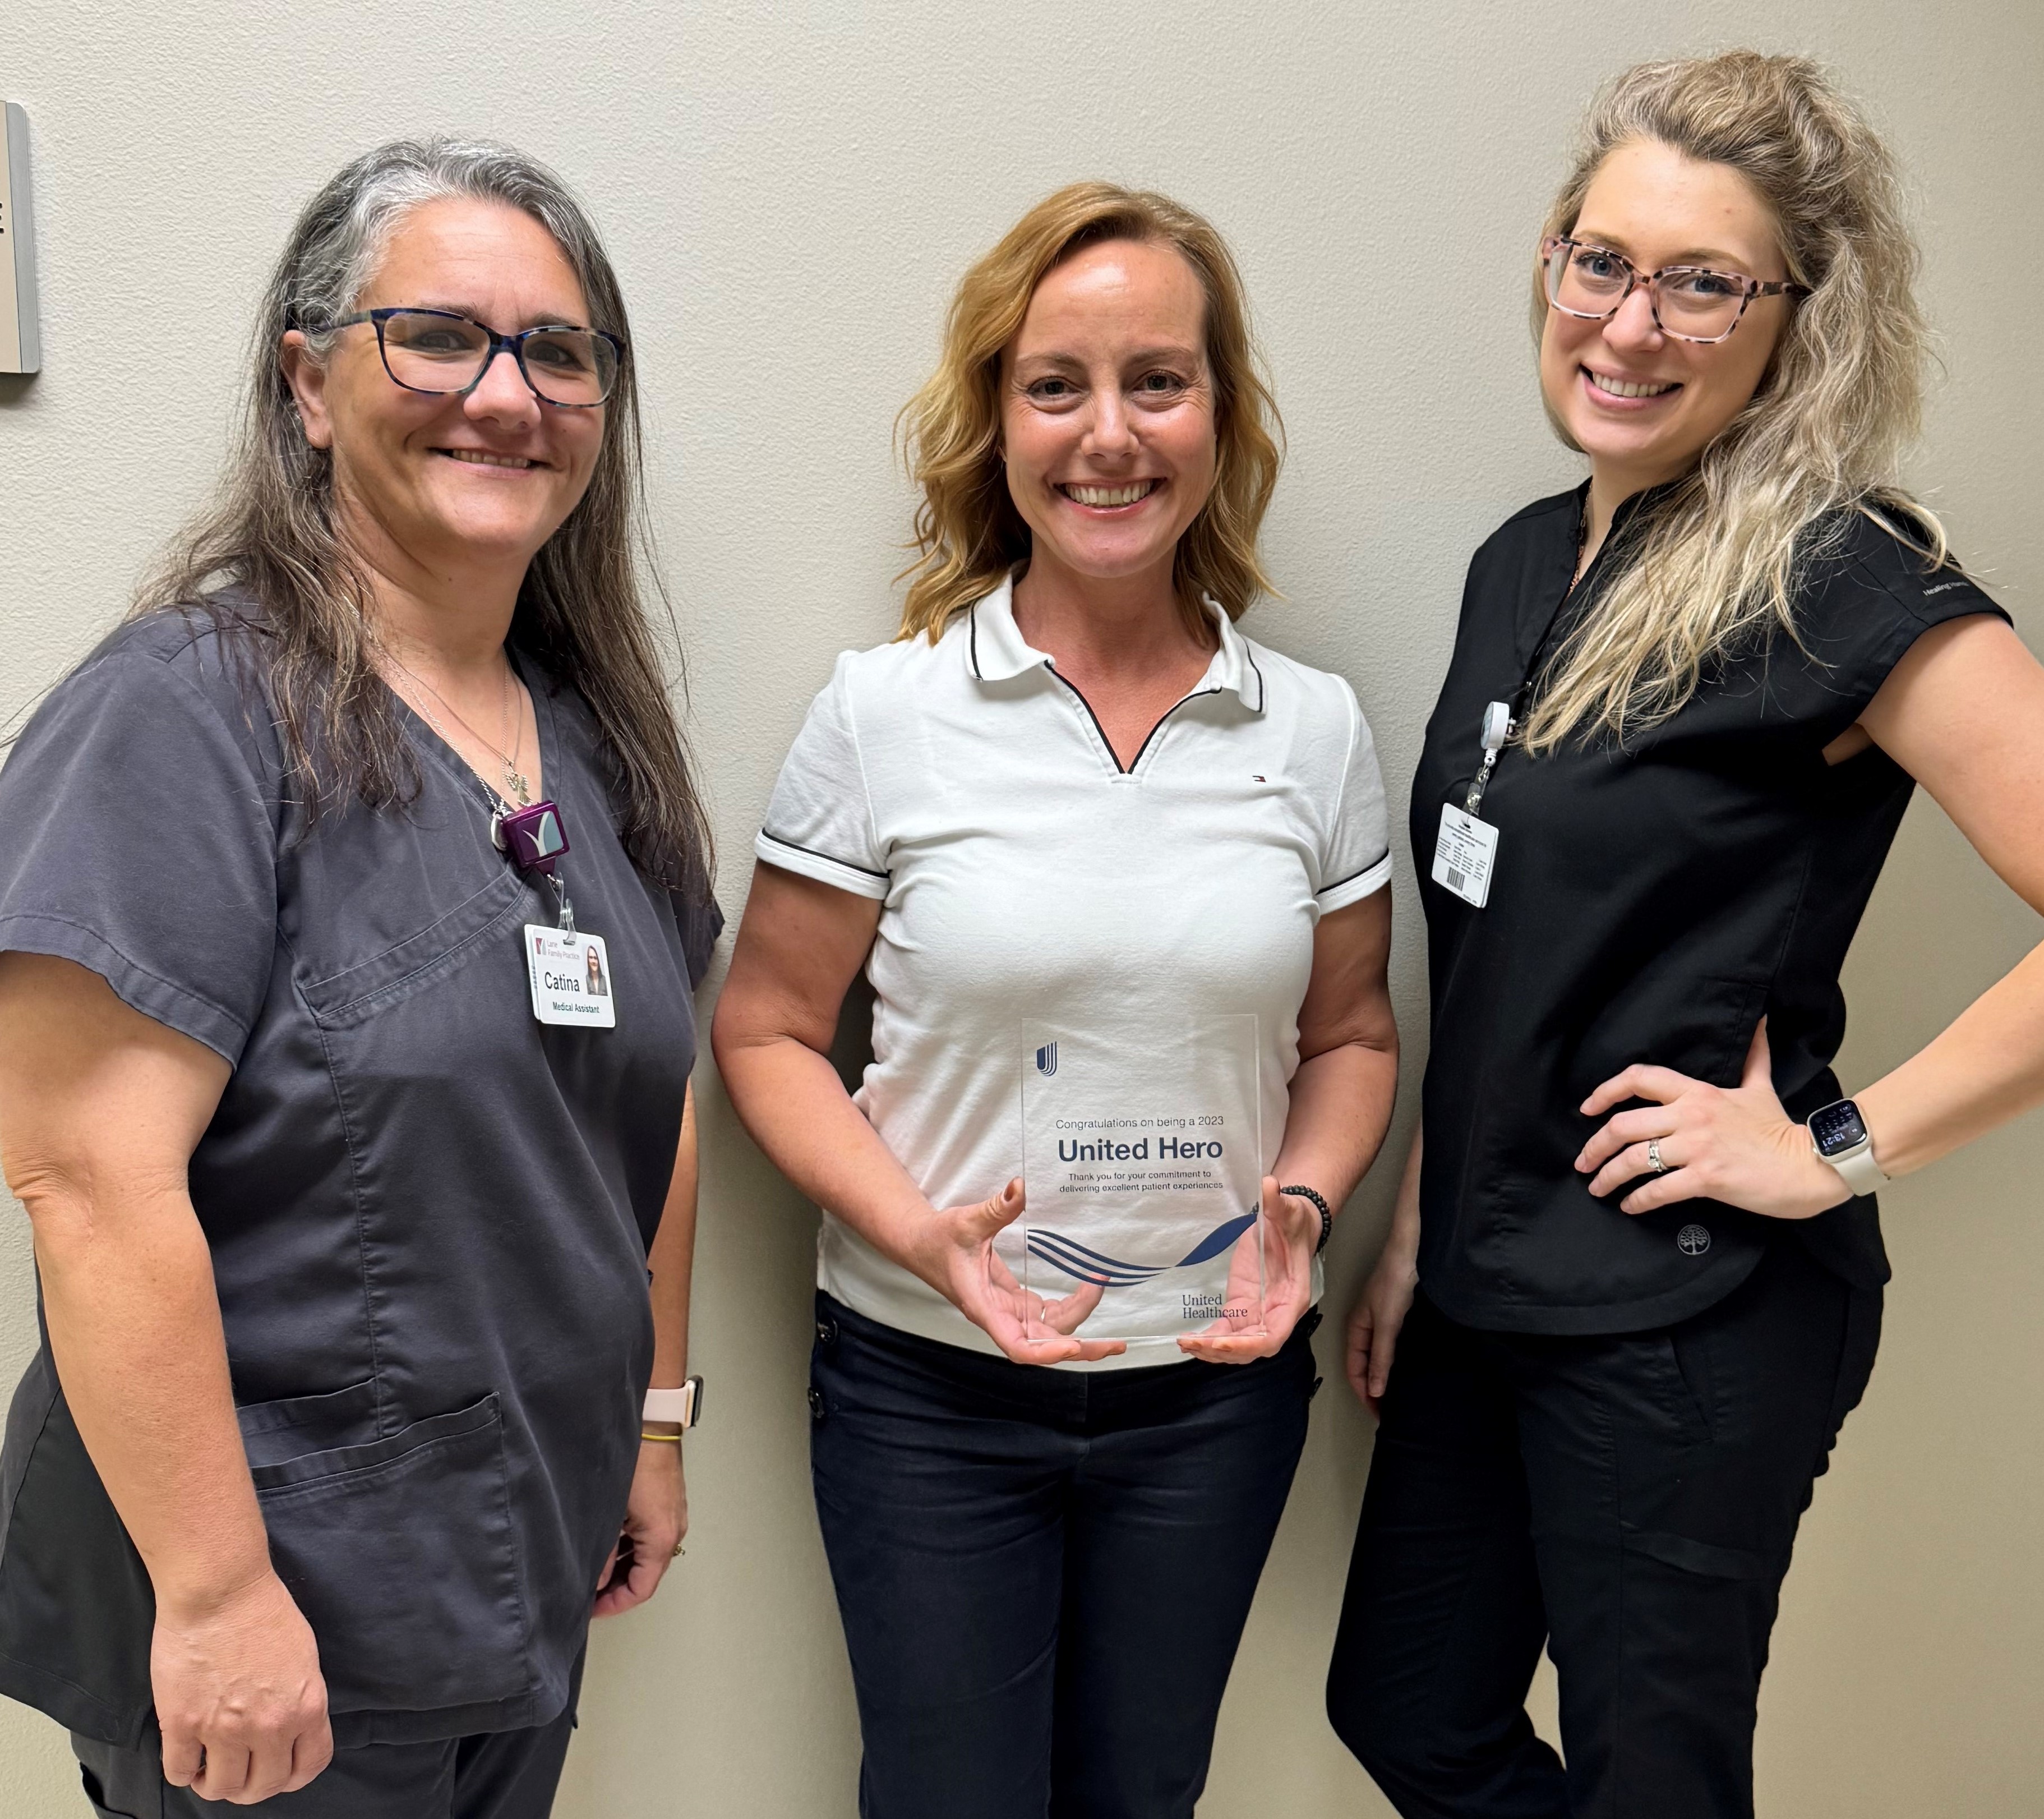 Kimberly Meiners, MD, Receives United Hero Award